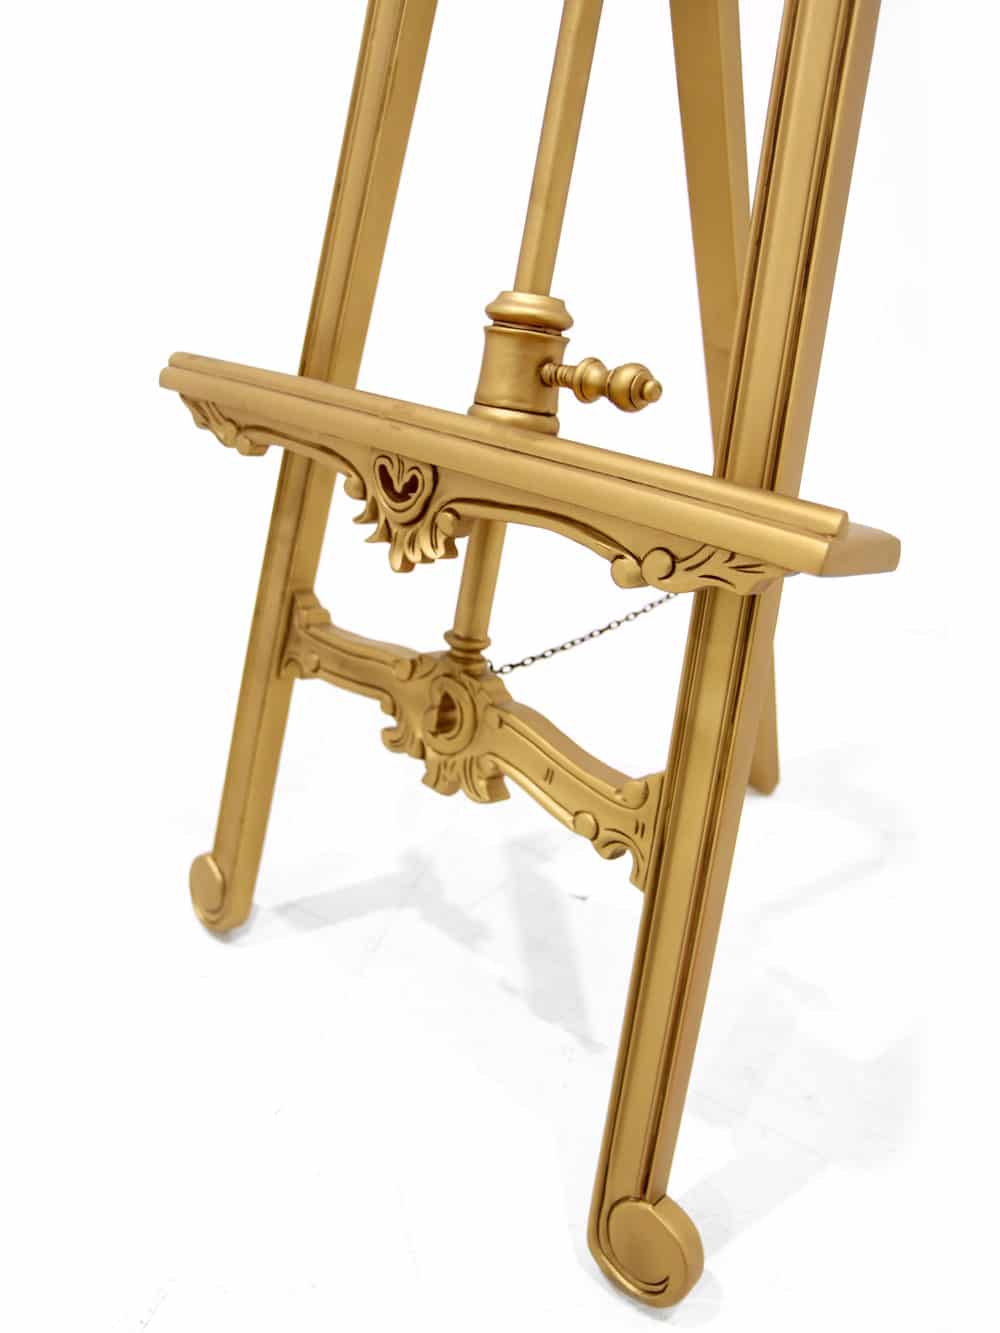 Decorative Gold Easel Style May Vary